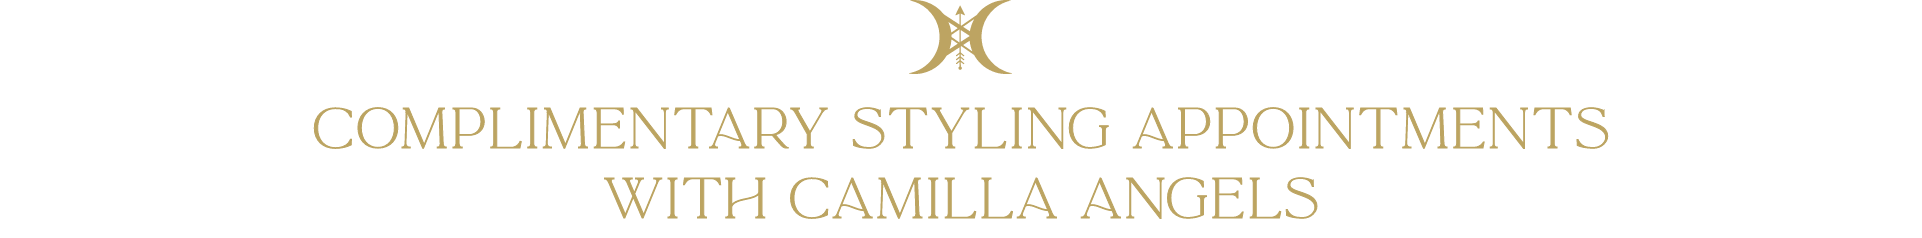 COMPLIMENTARY STYLING APPOINTMENTS WITH CAMILLA ANGELS